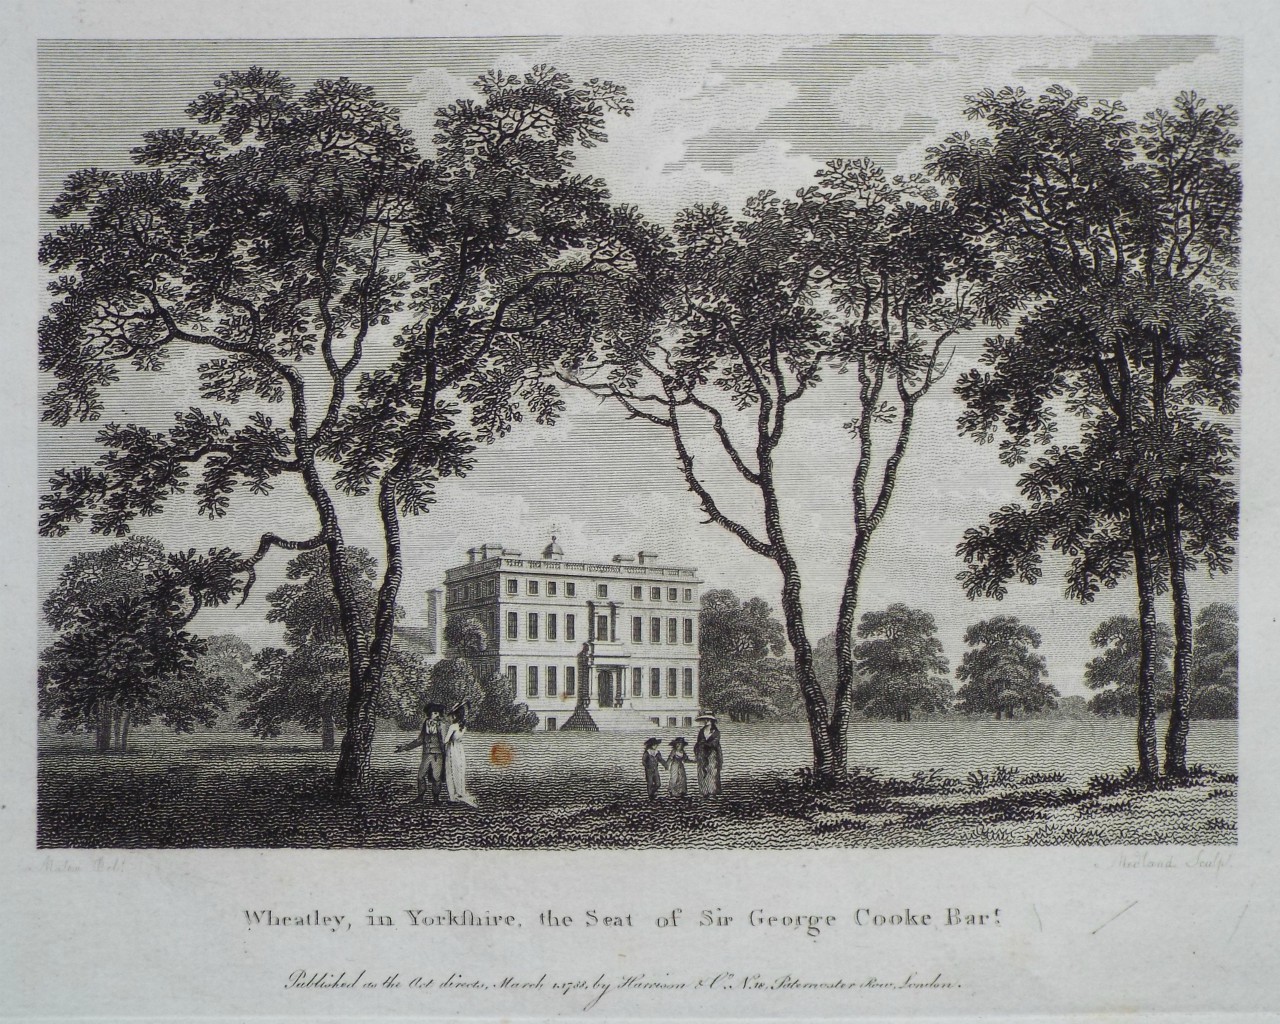 Print - Wheatley, in Yorkshire, the Seat of Sir George Cooke Bart. - 